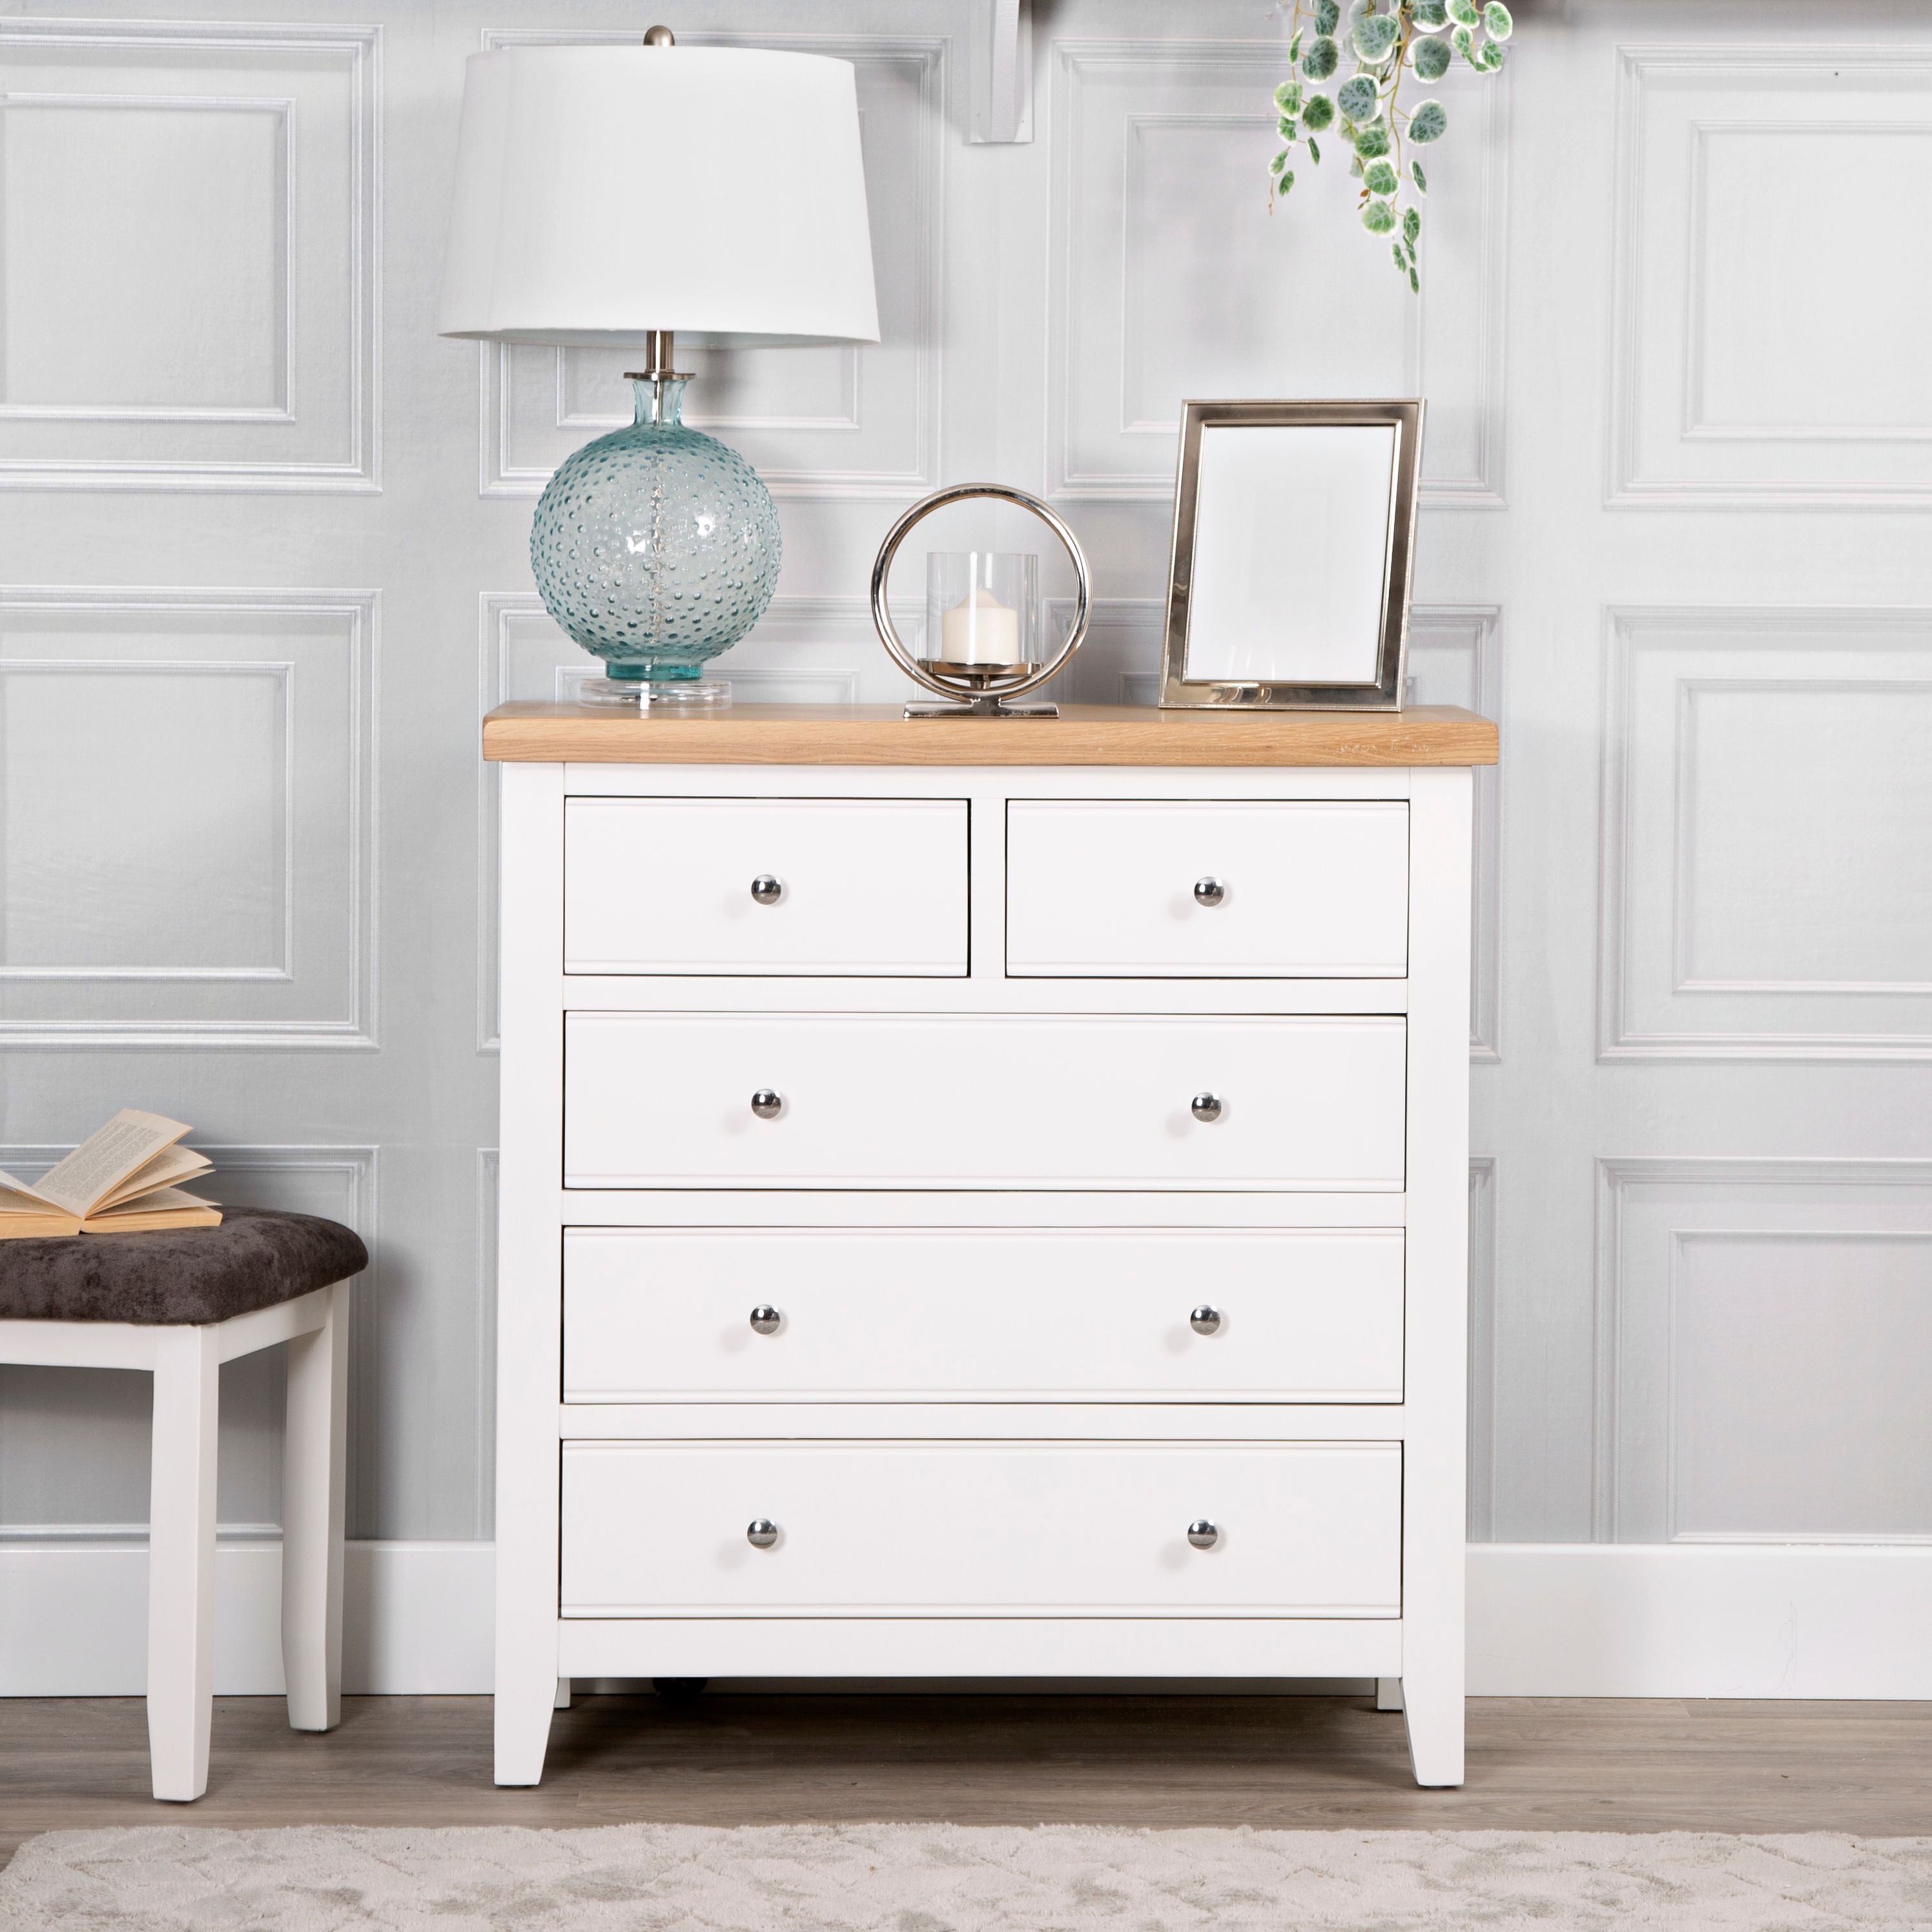 Earl 2 over 3 Chest of drawers - White